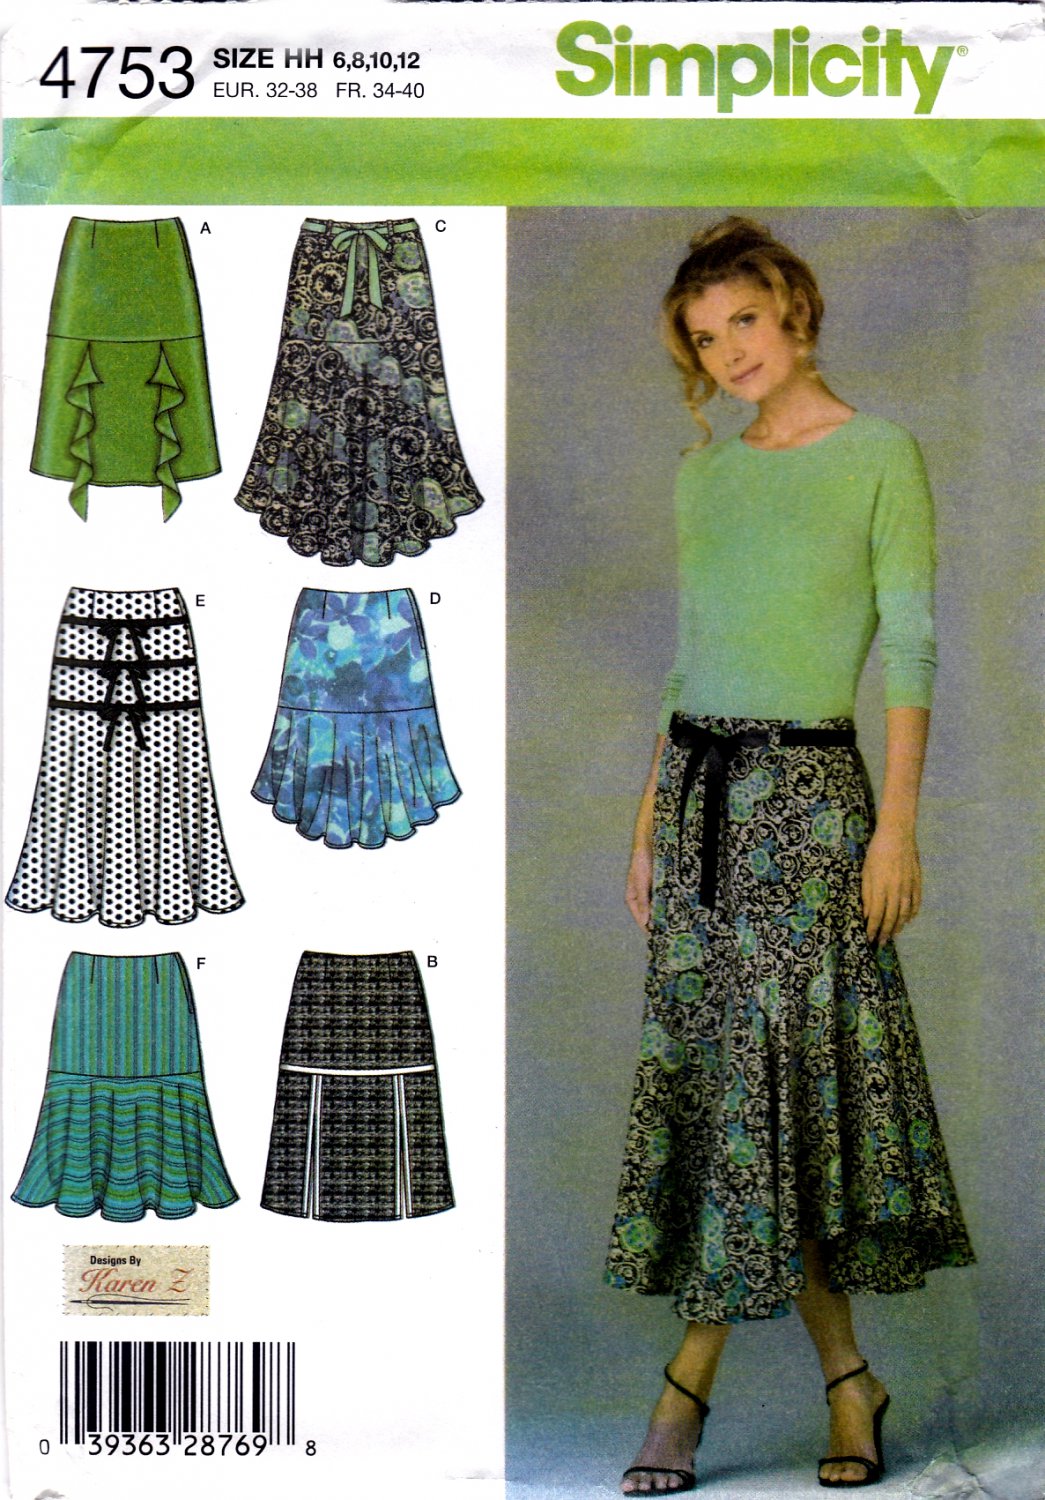 Simplicity 4753 Misses Skirts Hemline Flounce Variations Sewing Pattern Sizes 6-8-10-12